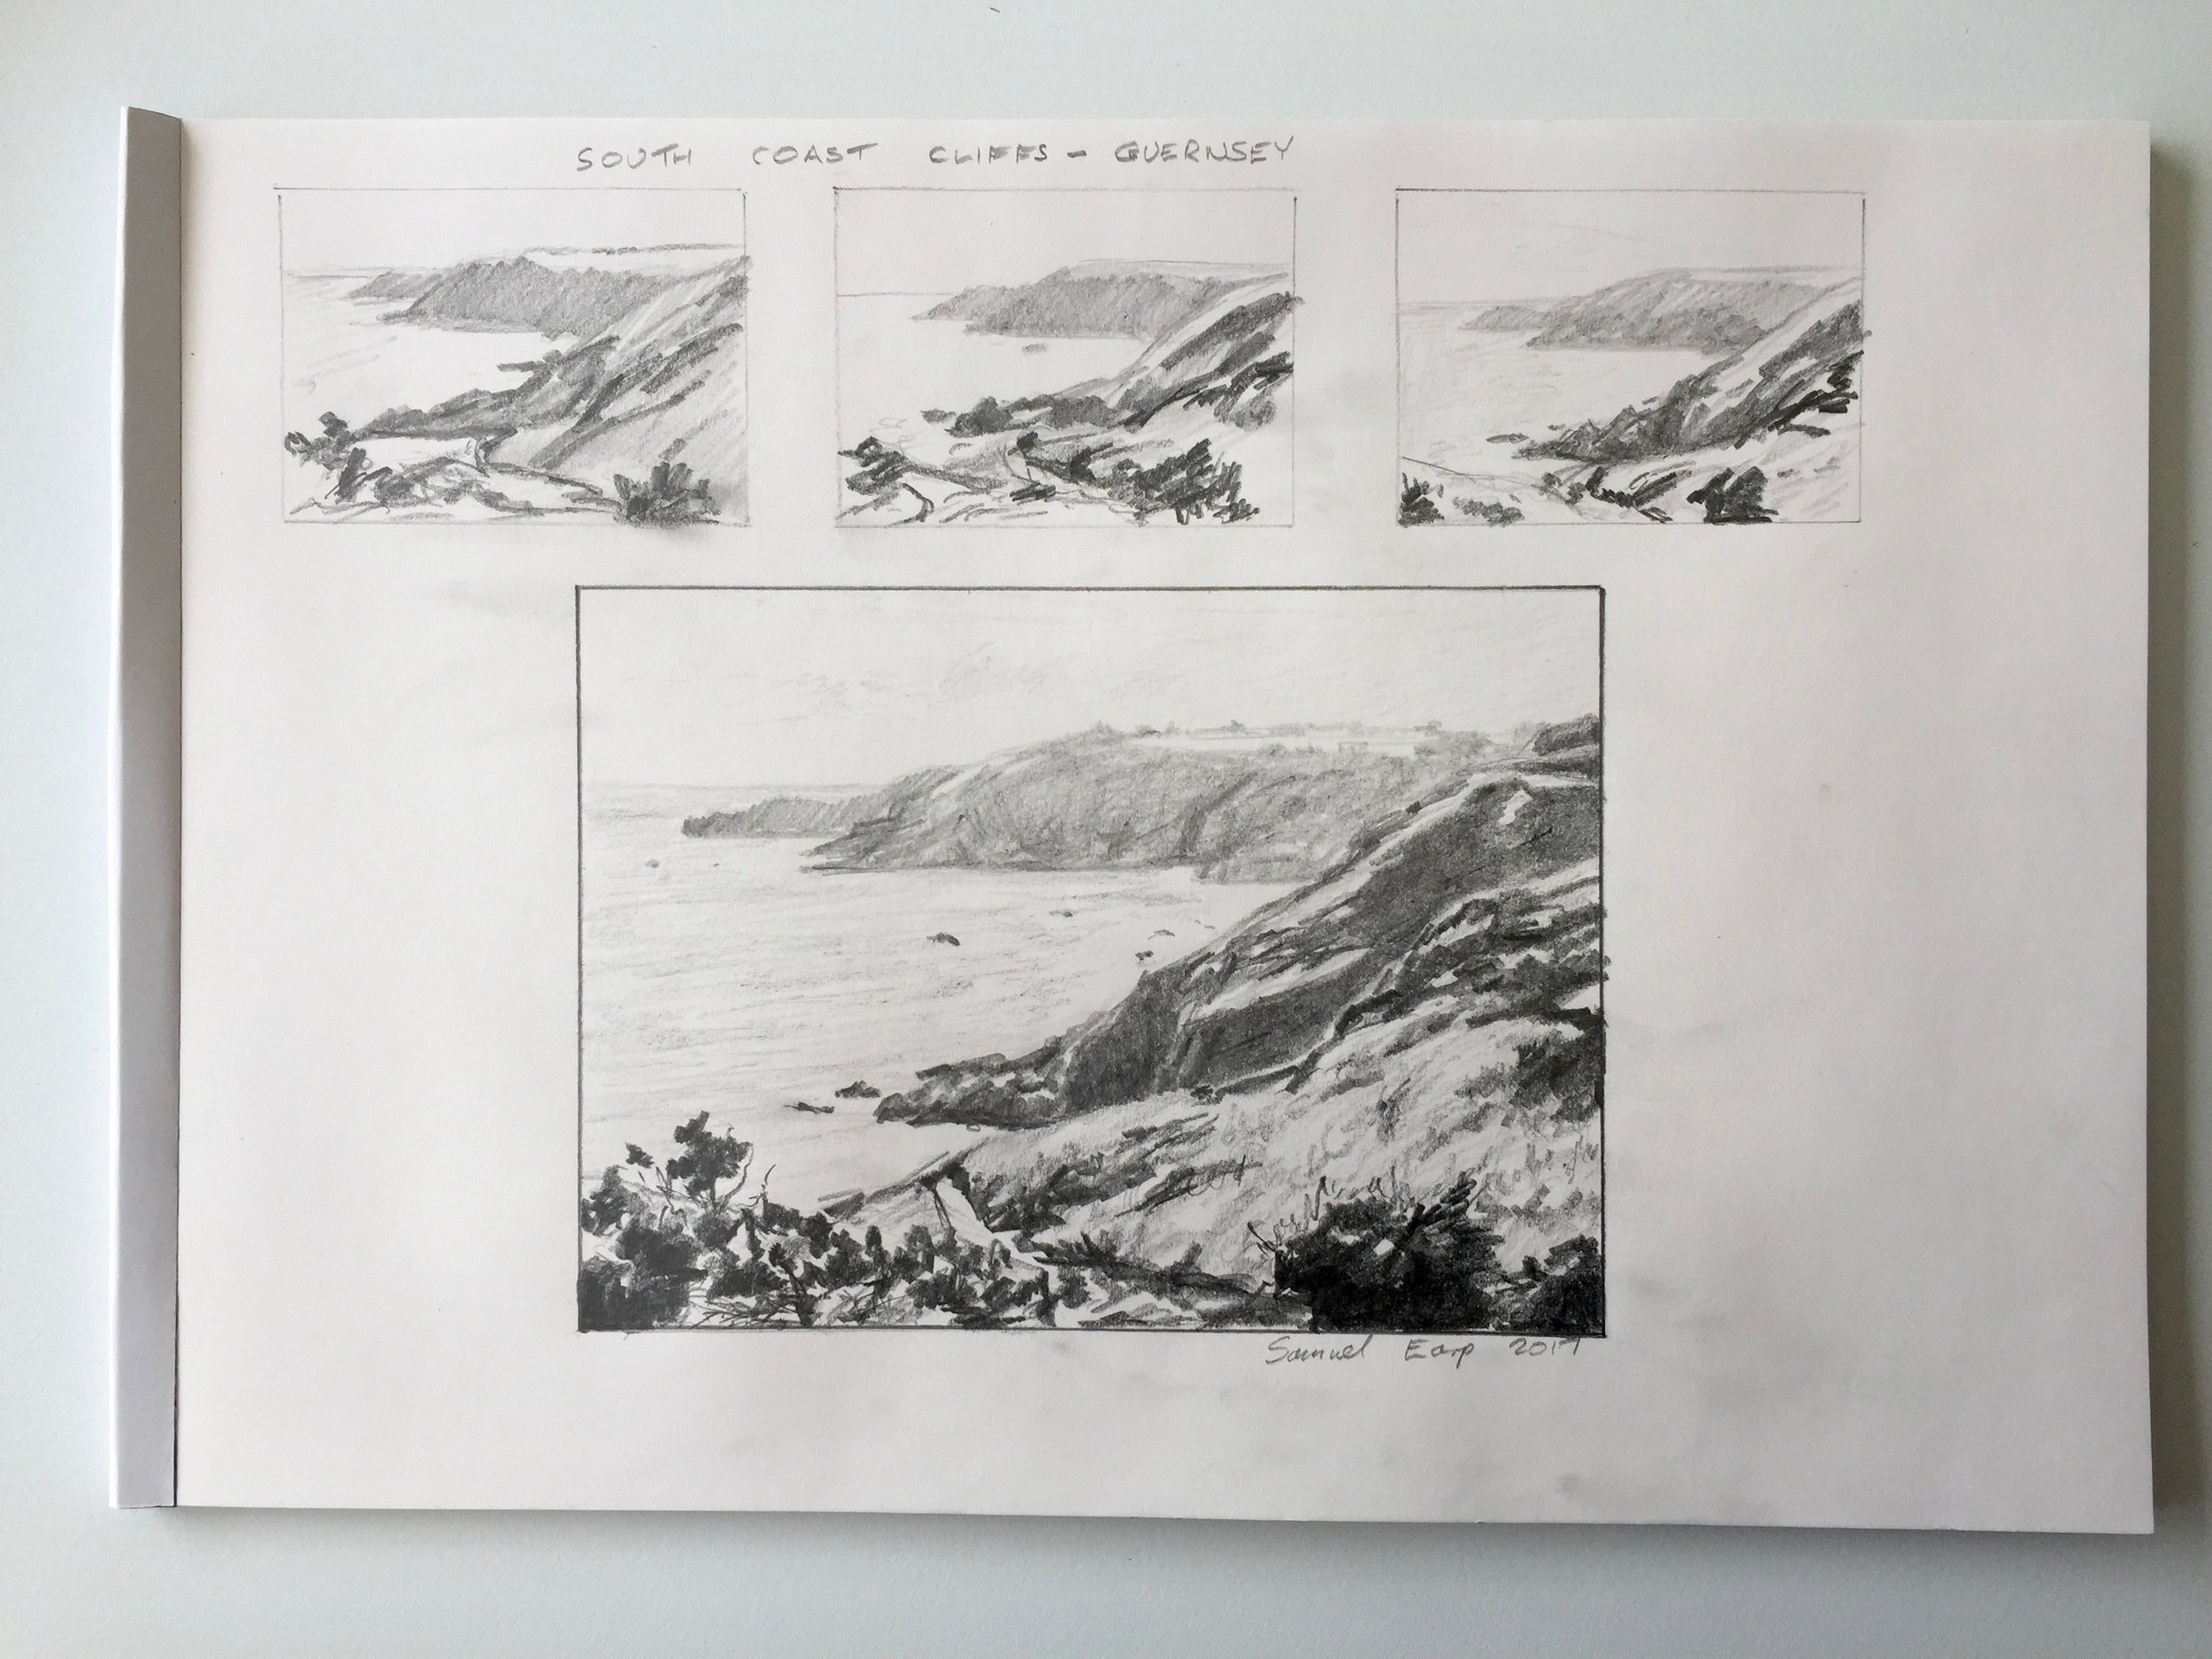 Pencil Sketch and thumbnail sketches of the south coast cliffs of Guernsey.